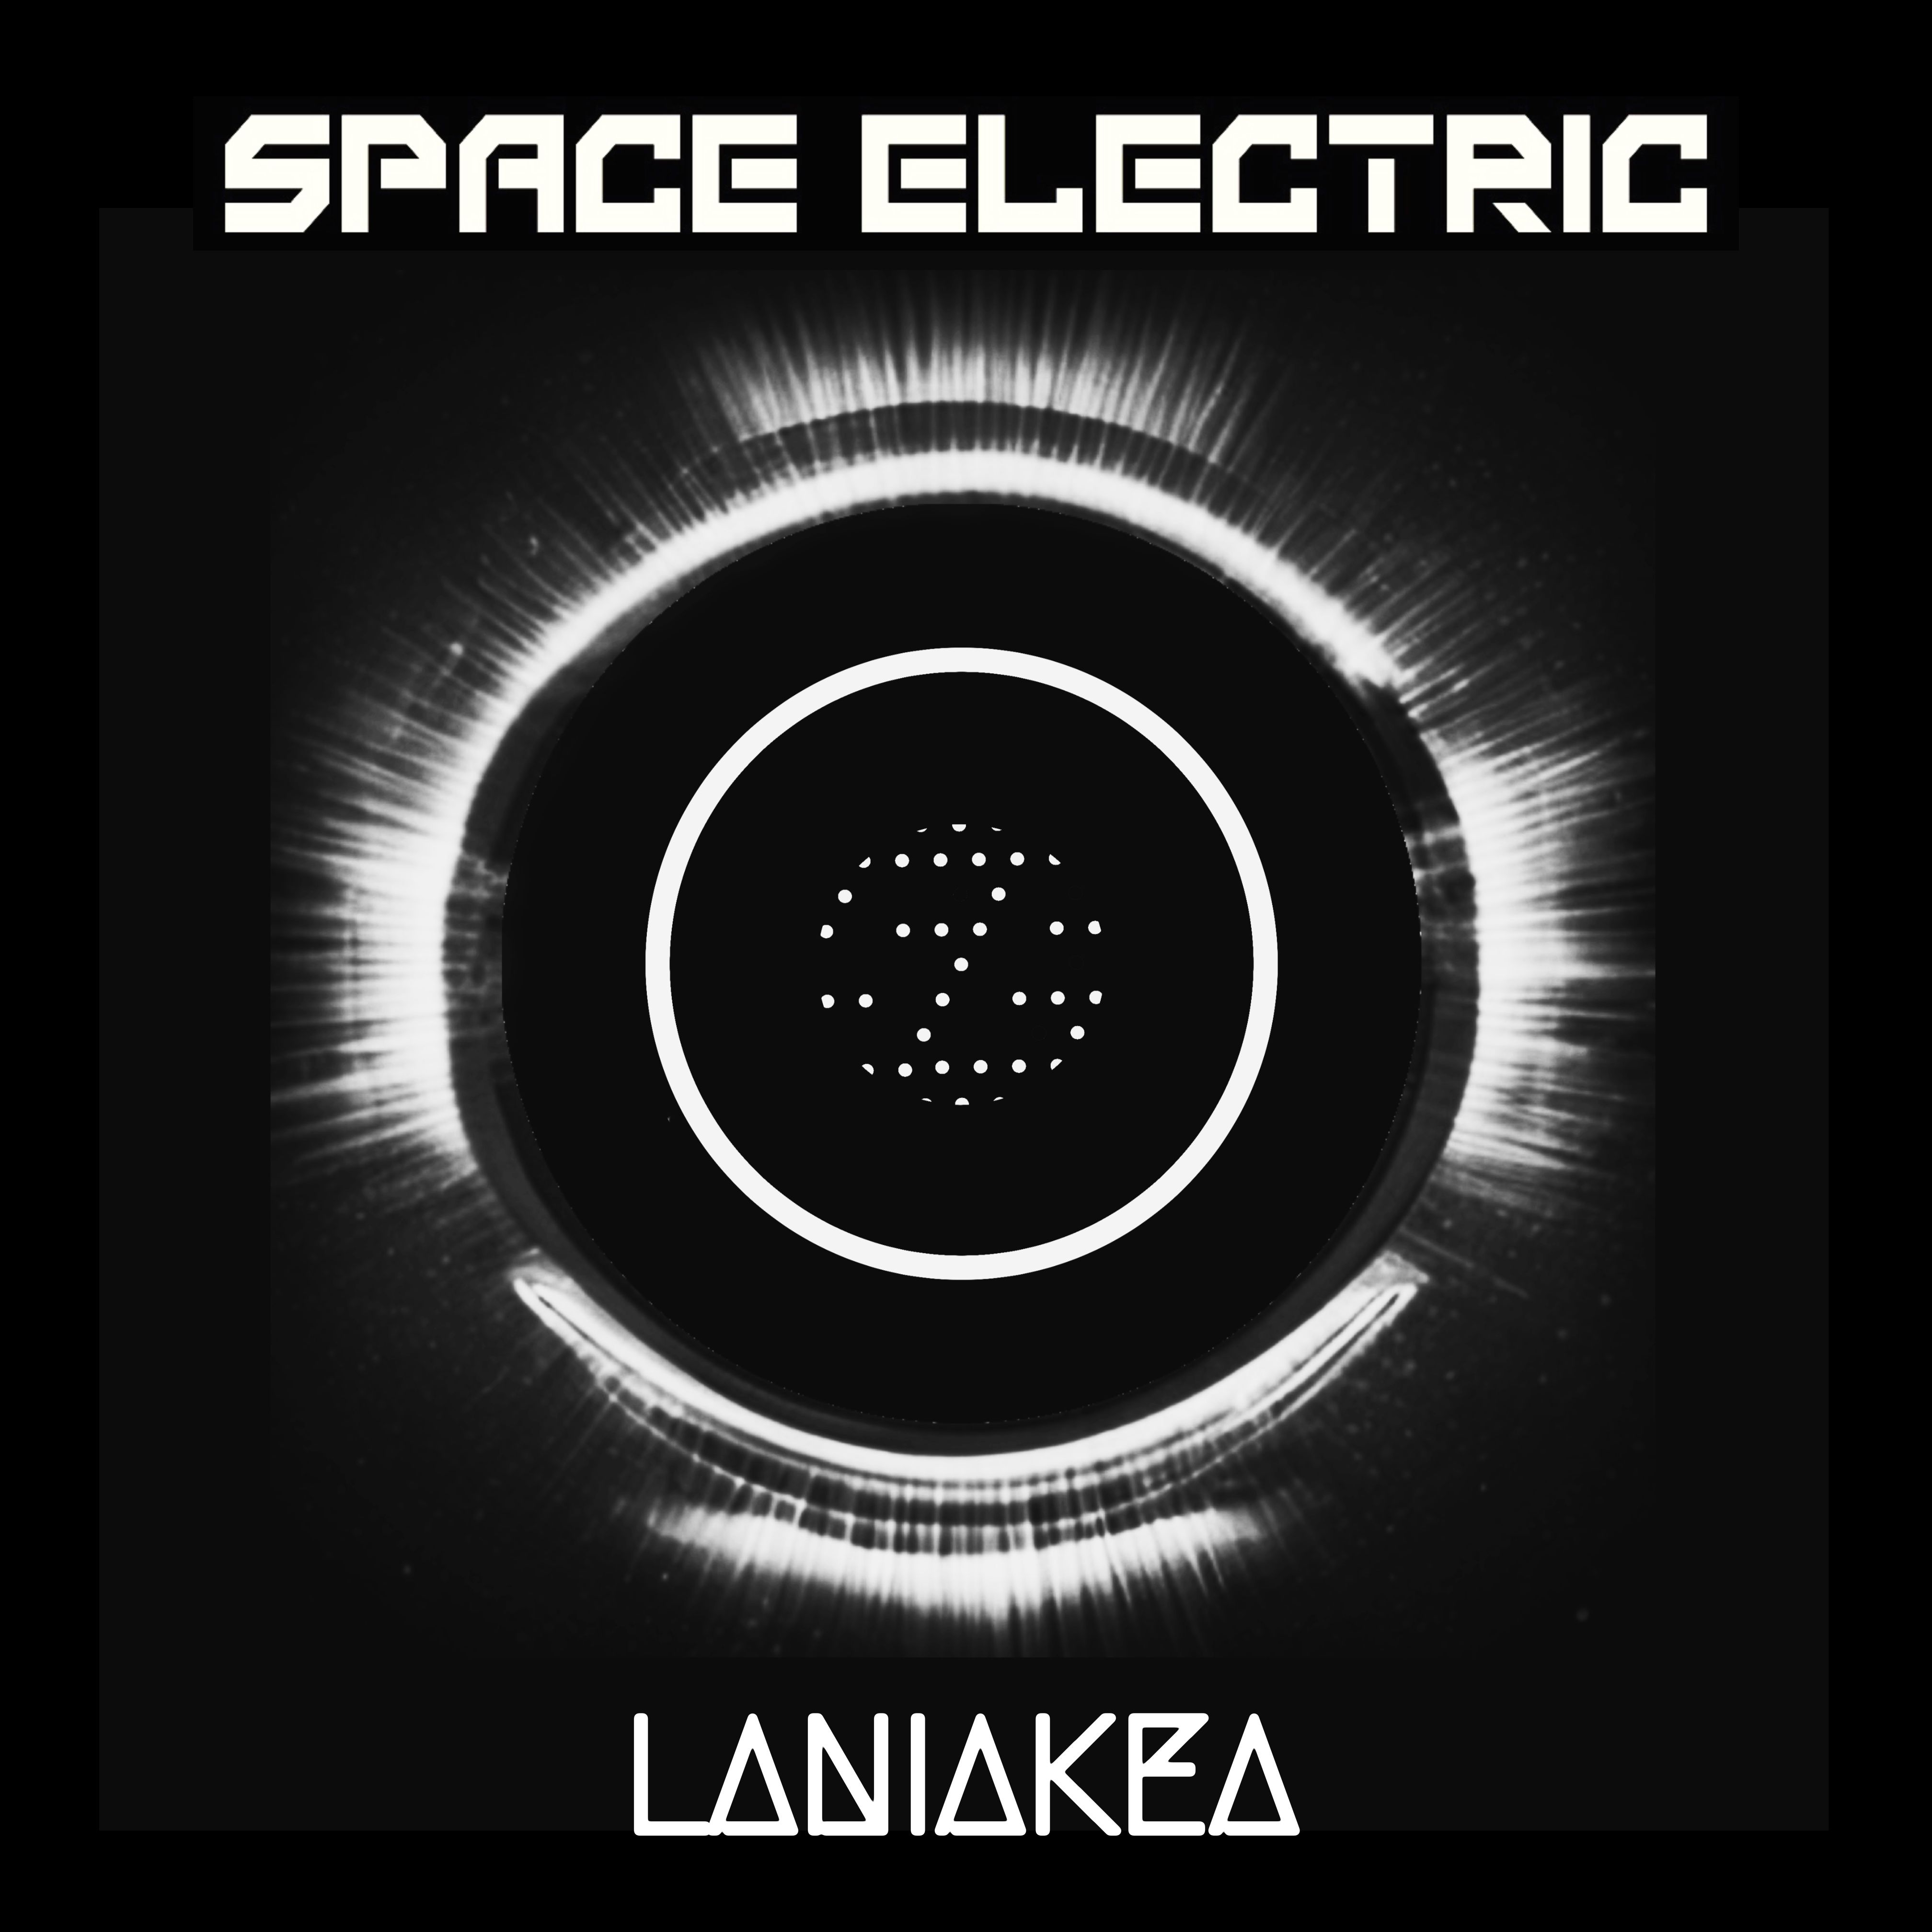 Space Electric